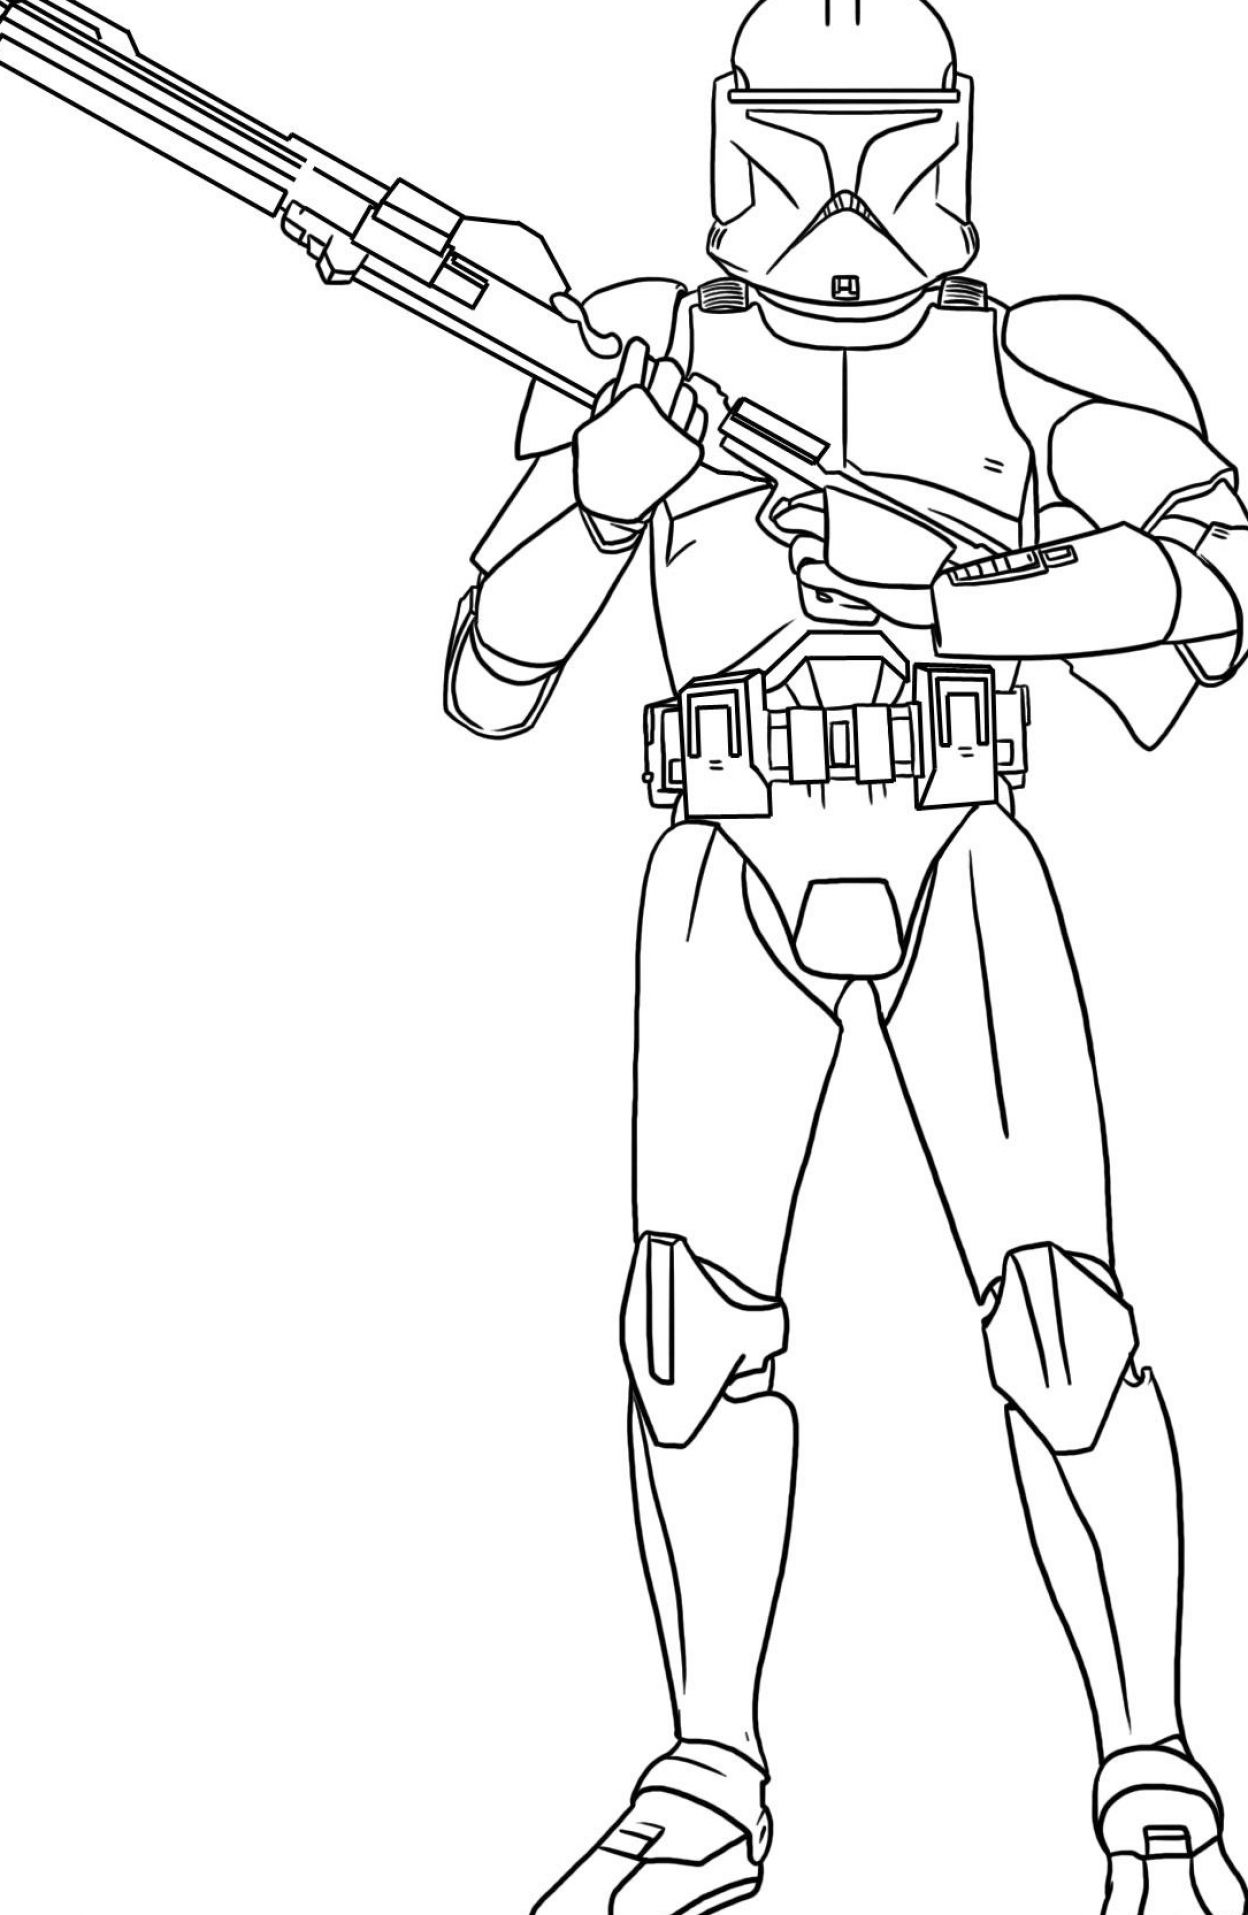 Star Wars coloring page to download for free